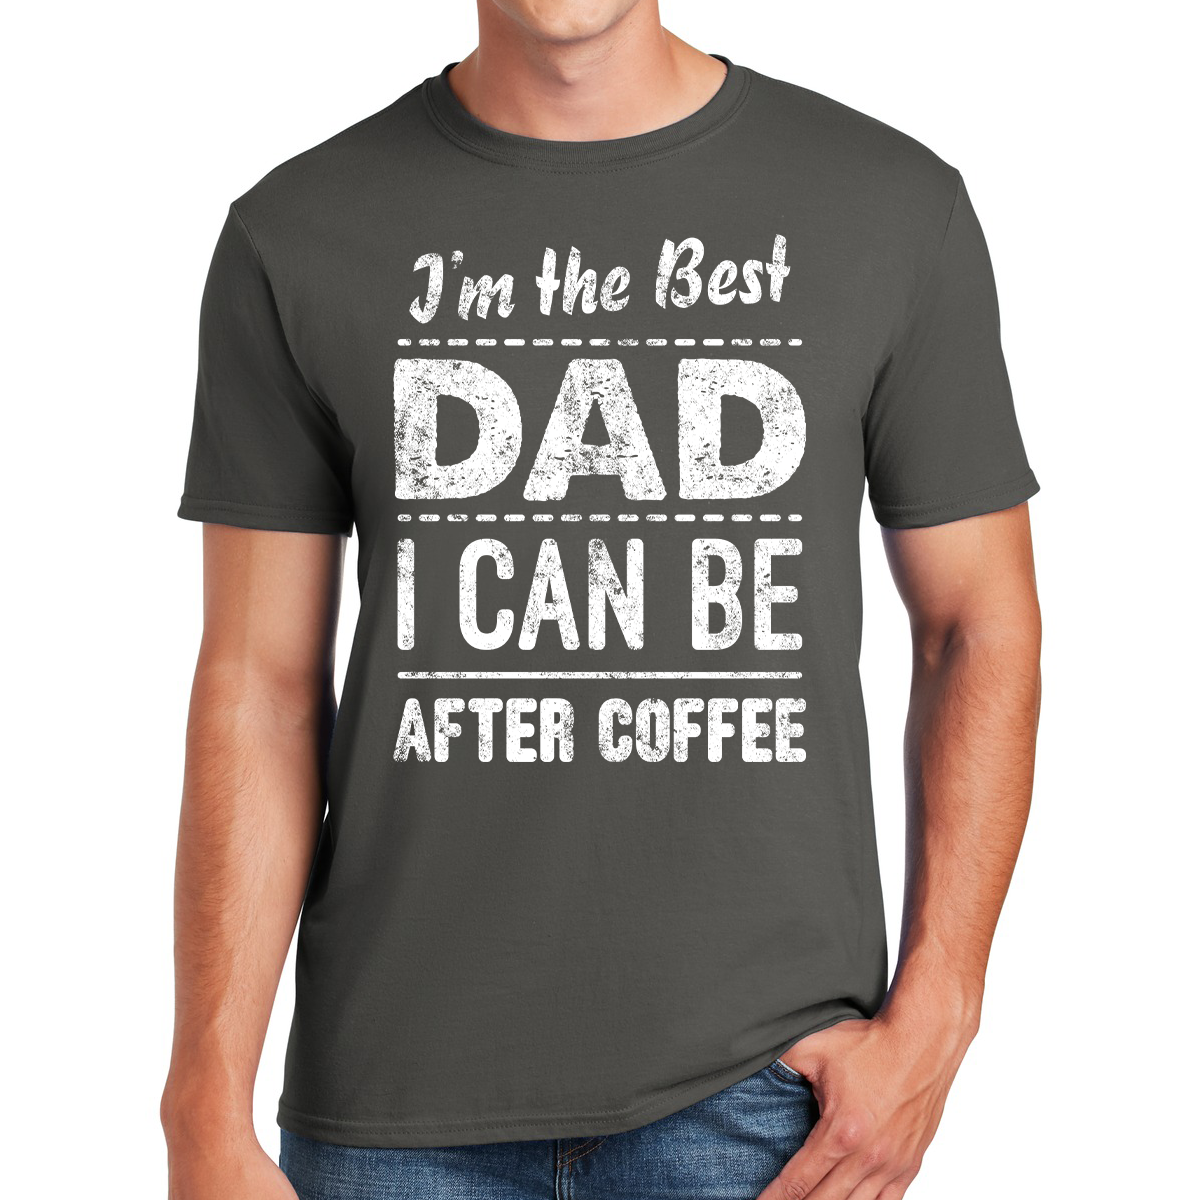 I'm The Best Dad I Can Be After Coffee Brewing Fatherhood Excellence Awesome Dad T-shirt